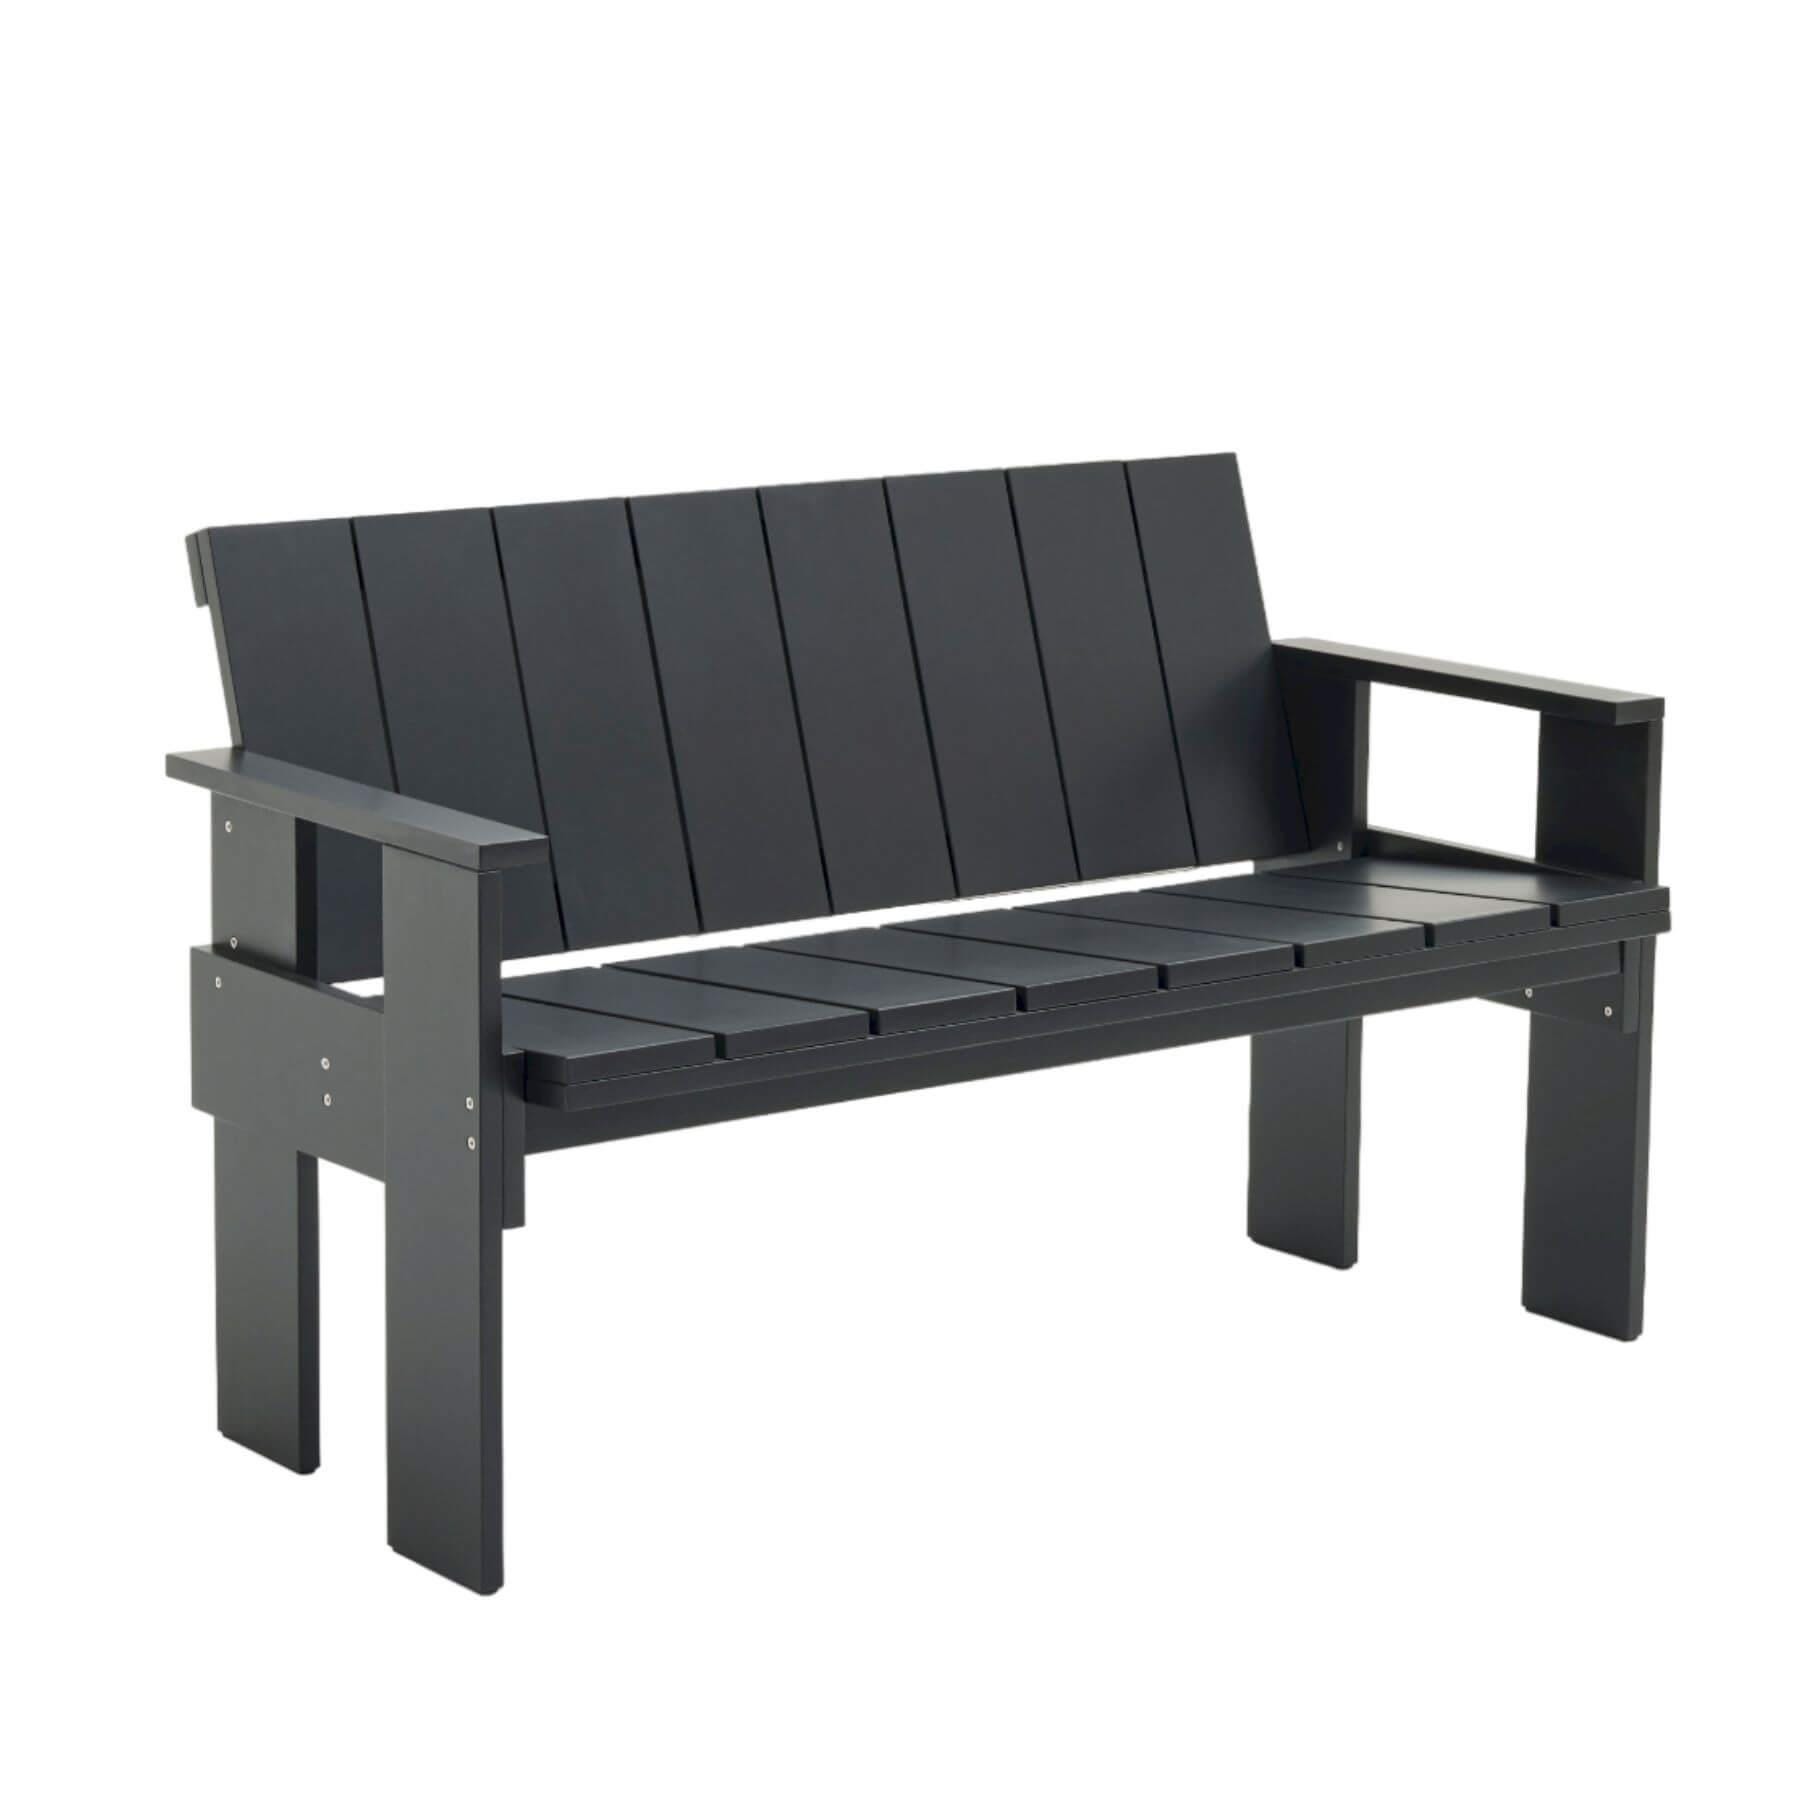 Hay Crate Dining Bench Black Designer Furniture From Holloways Of Ludlow